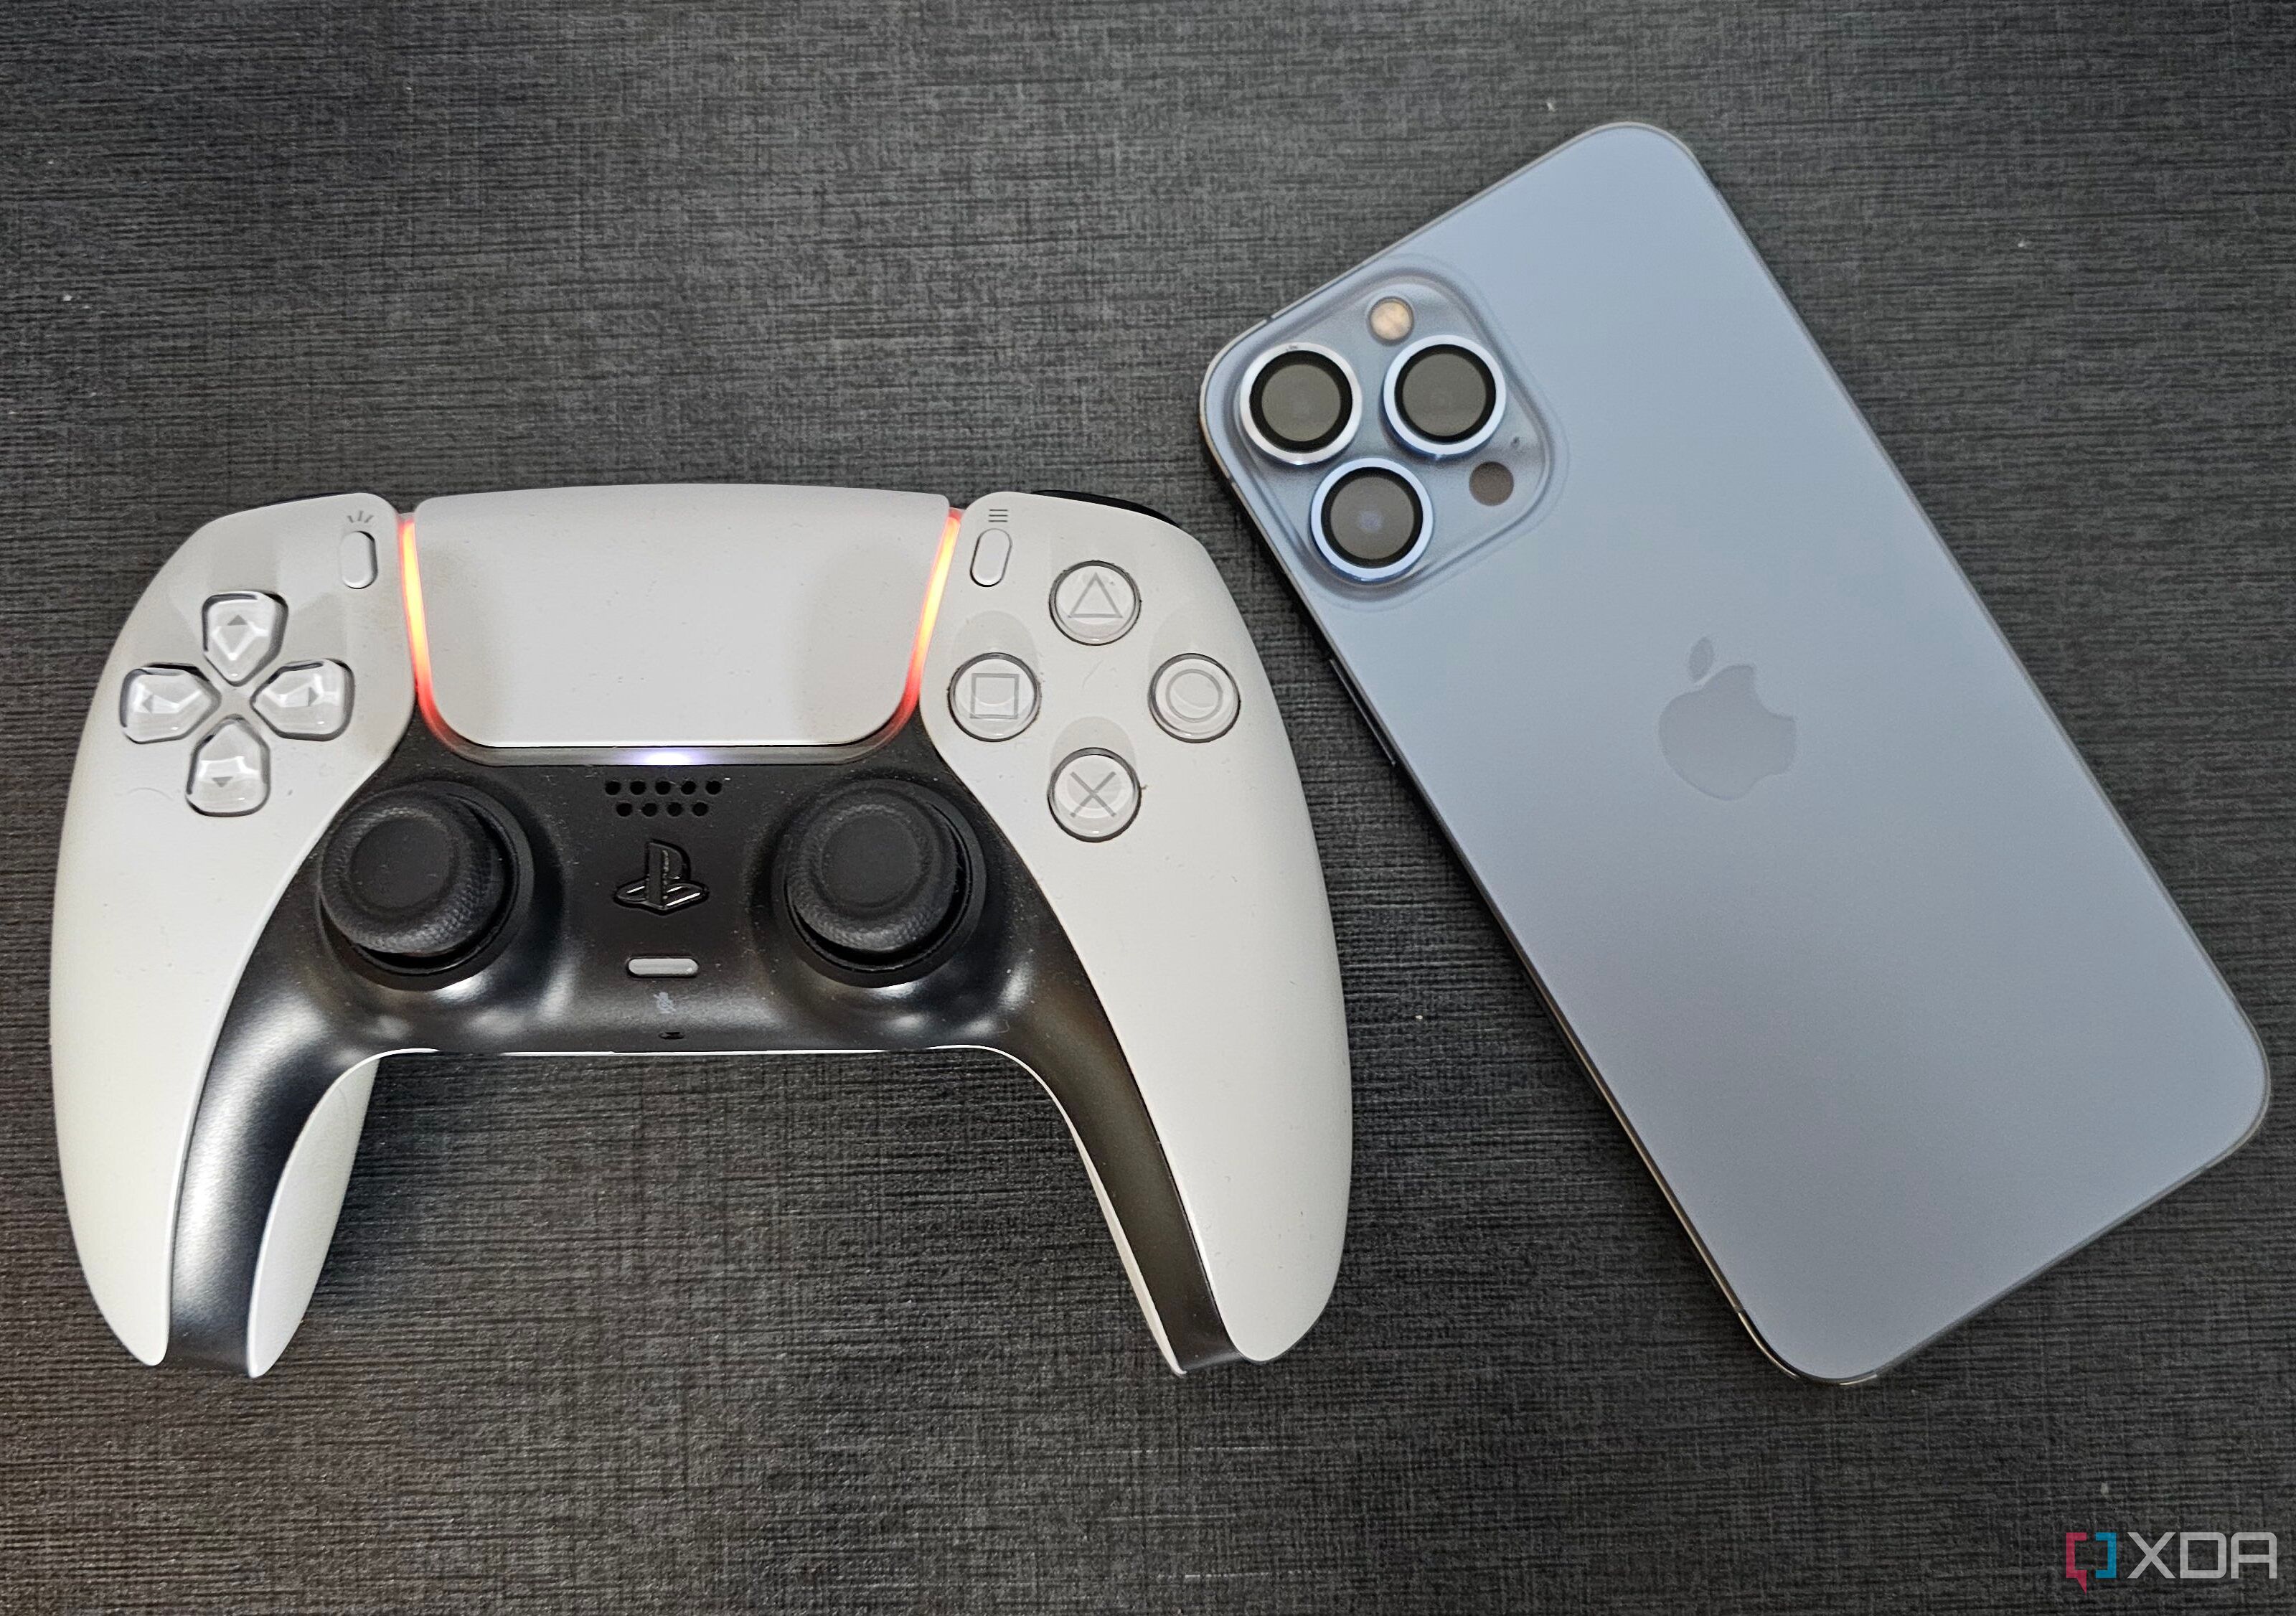 How to connect a PS5 controller to your iPhone or iPad